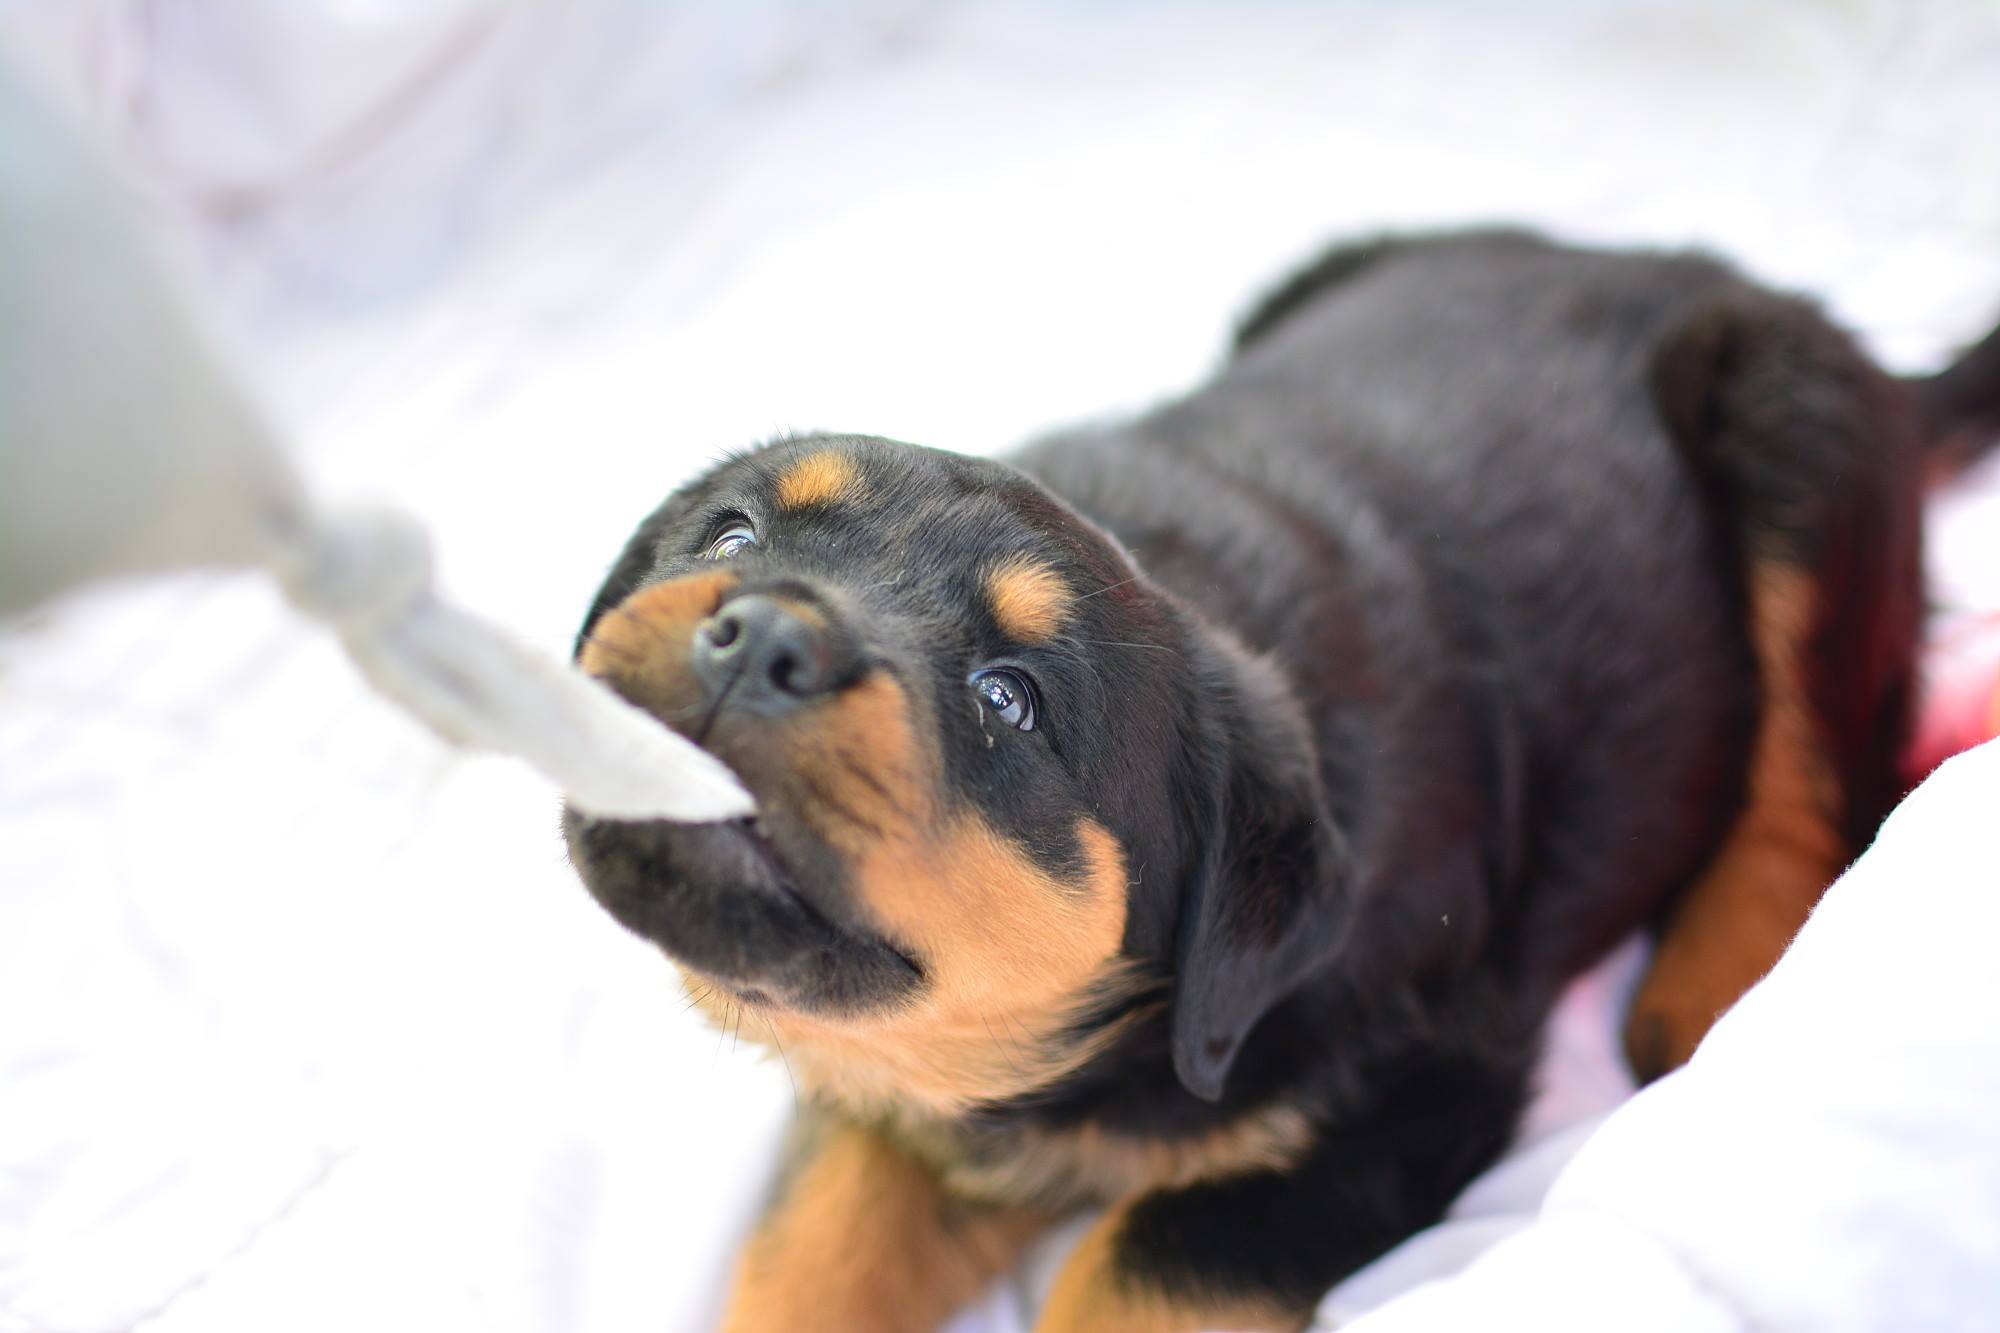 Rottweiler puppy pulling a tied fabric